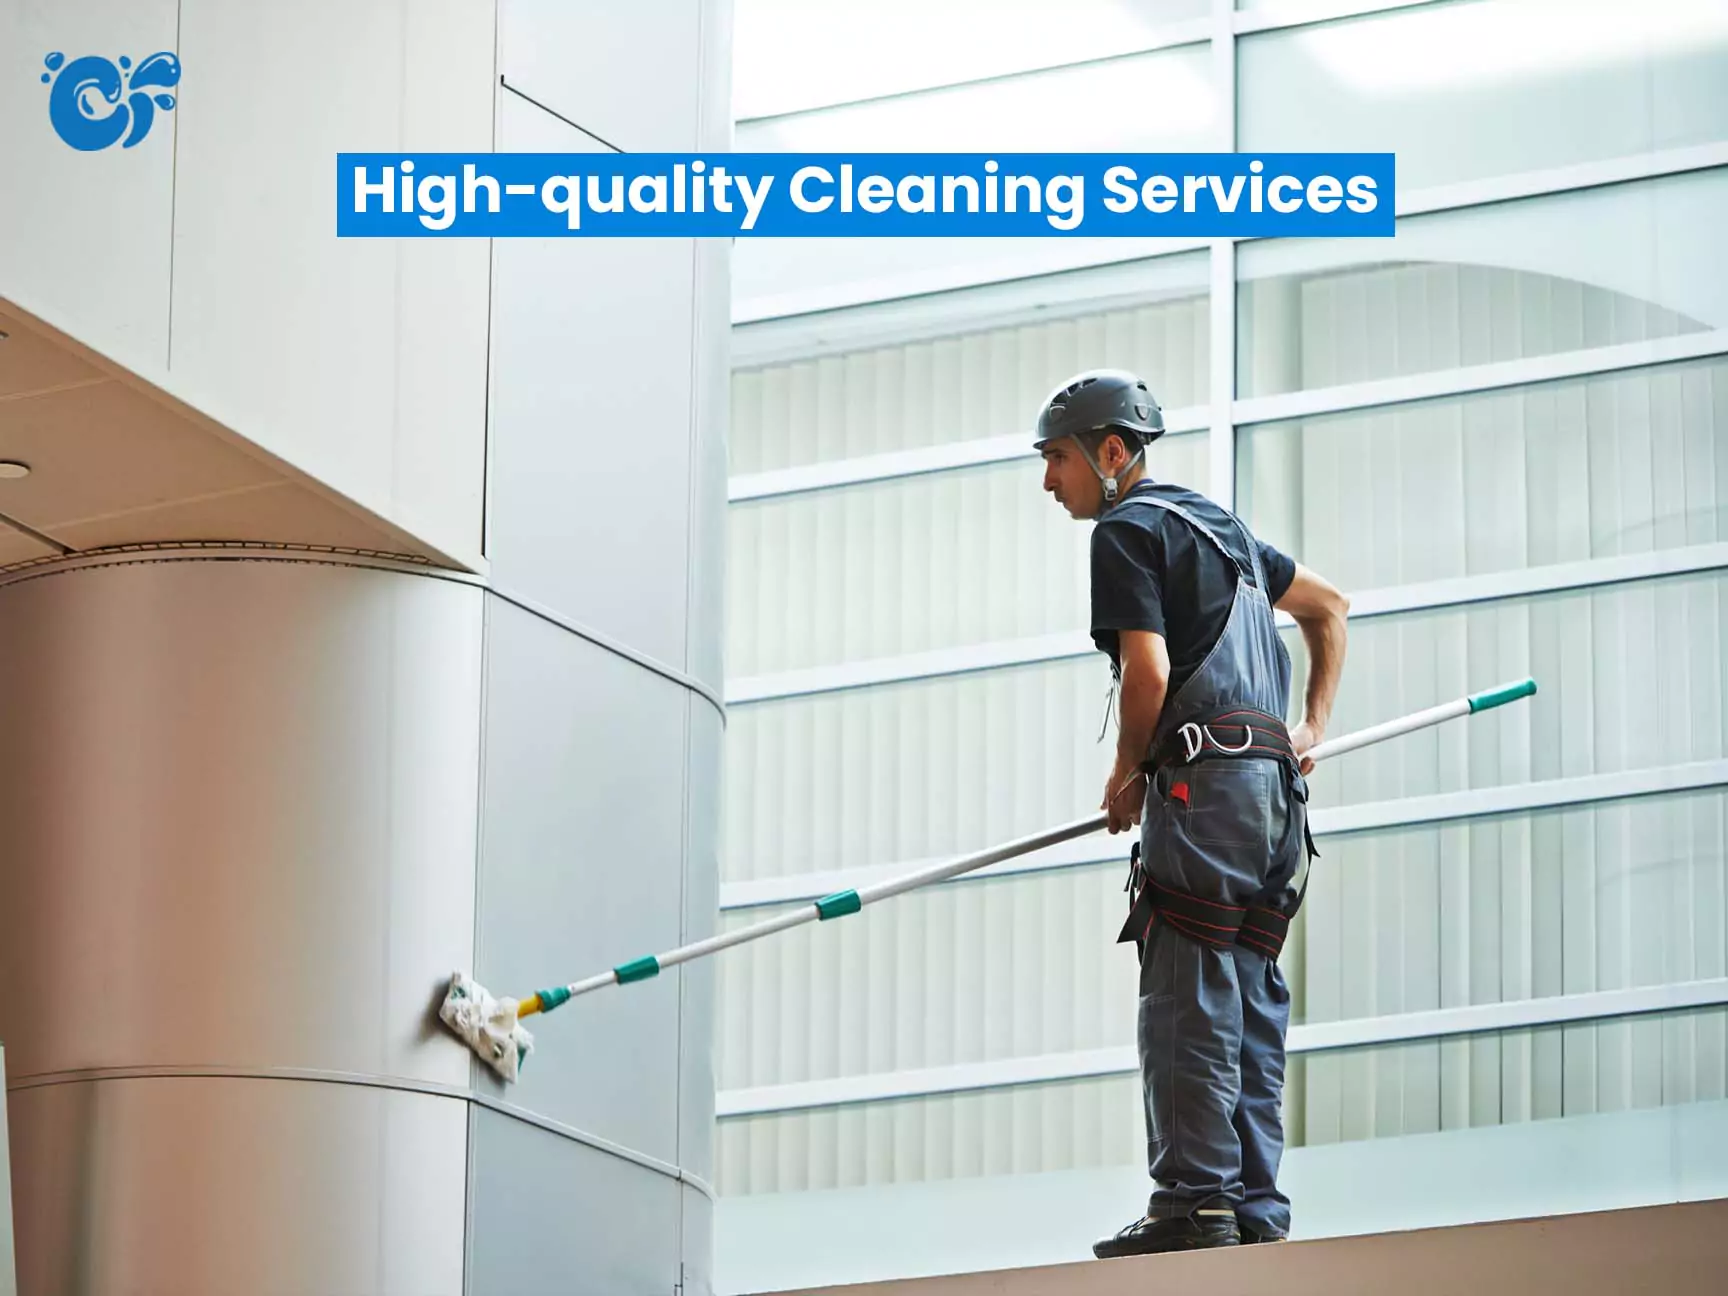 High-quality Cleaning Services - img